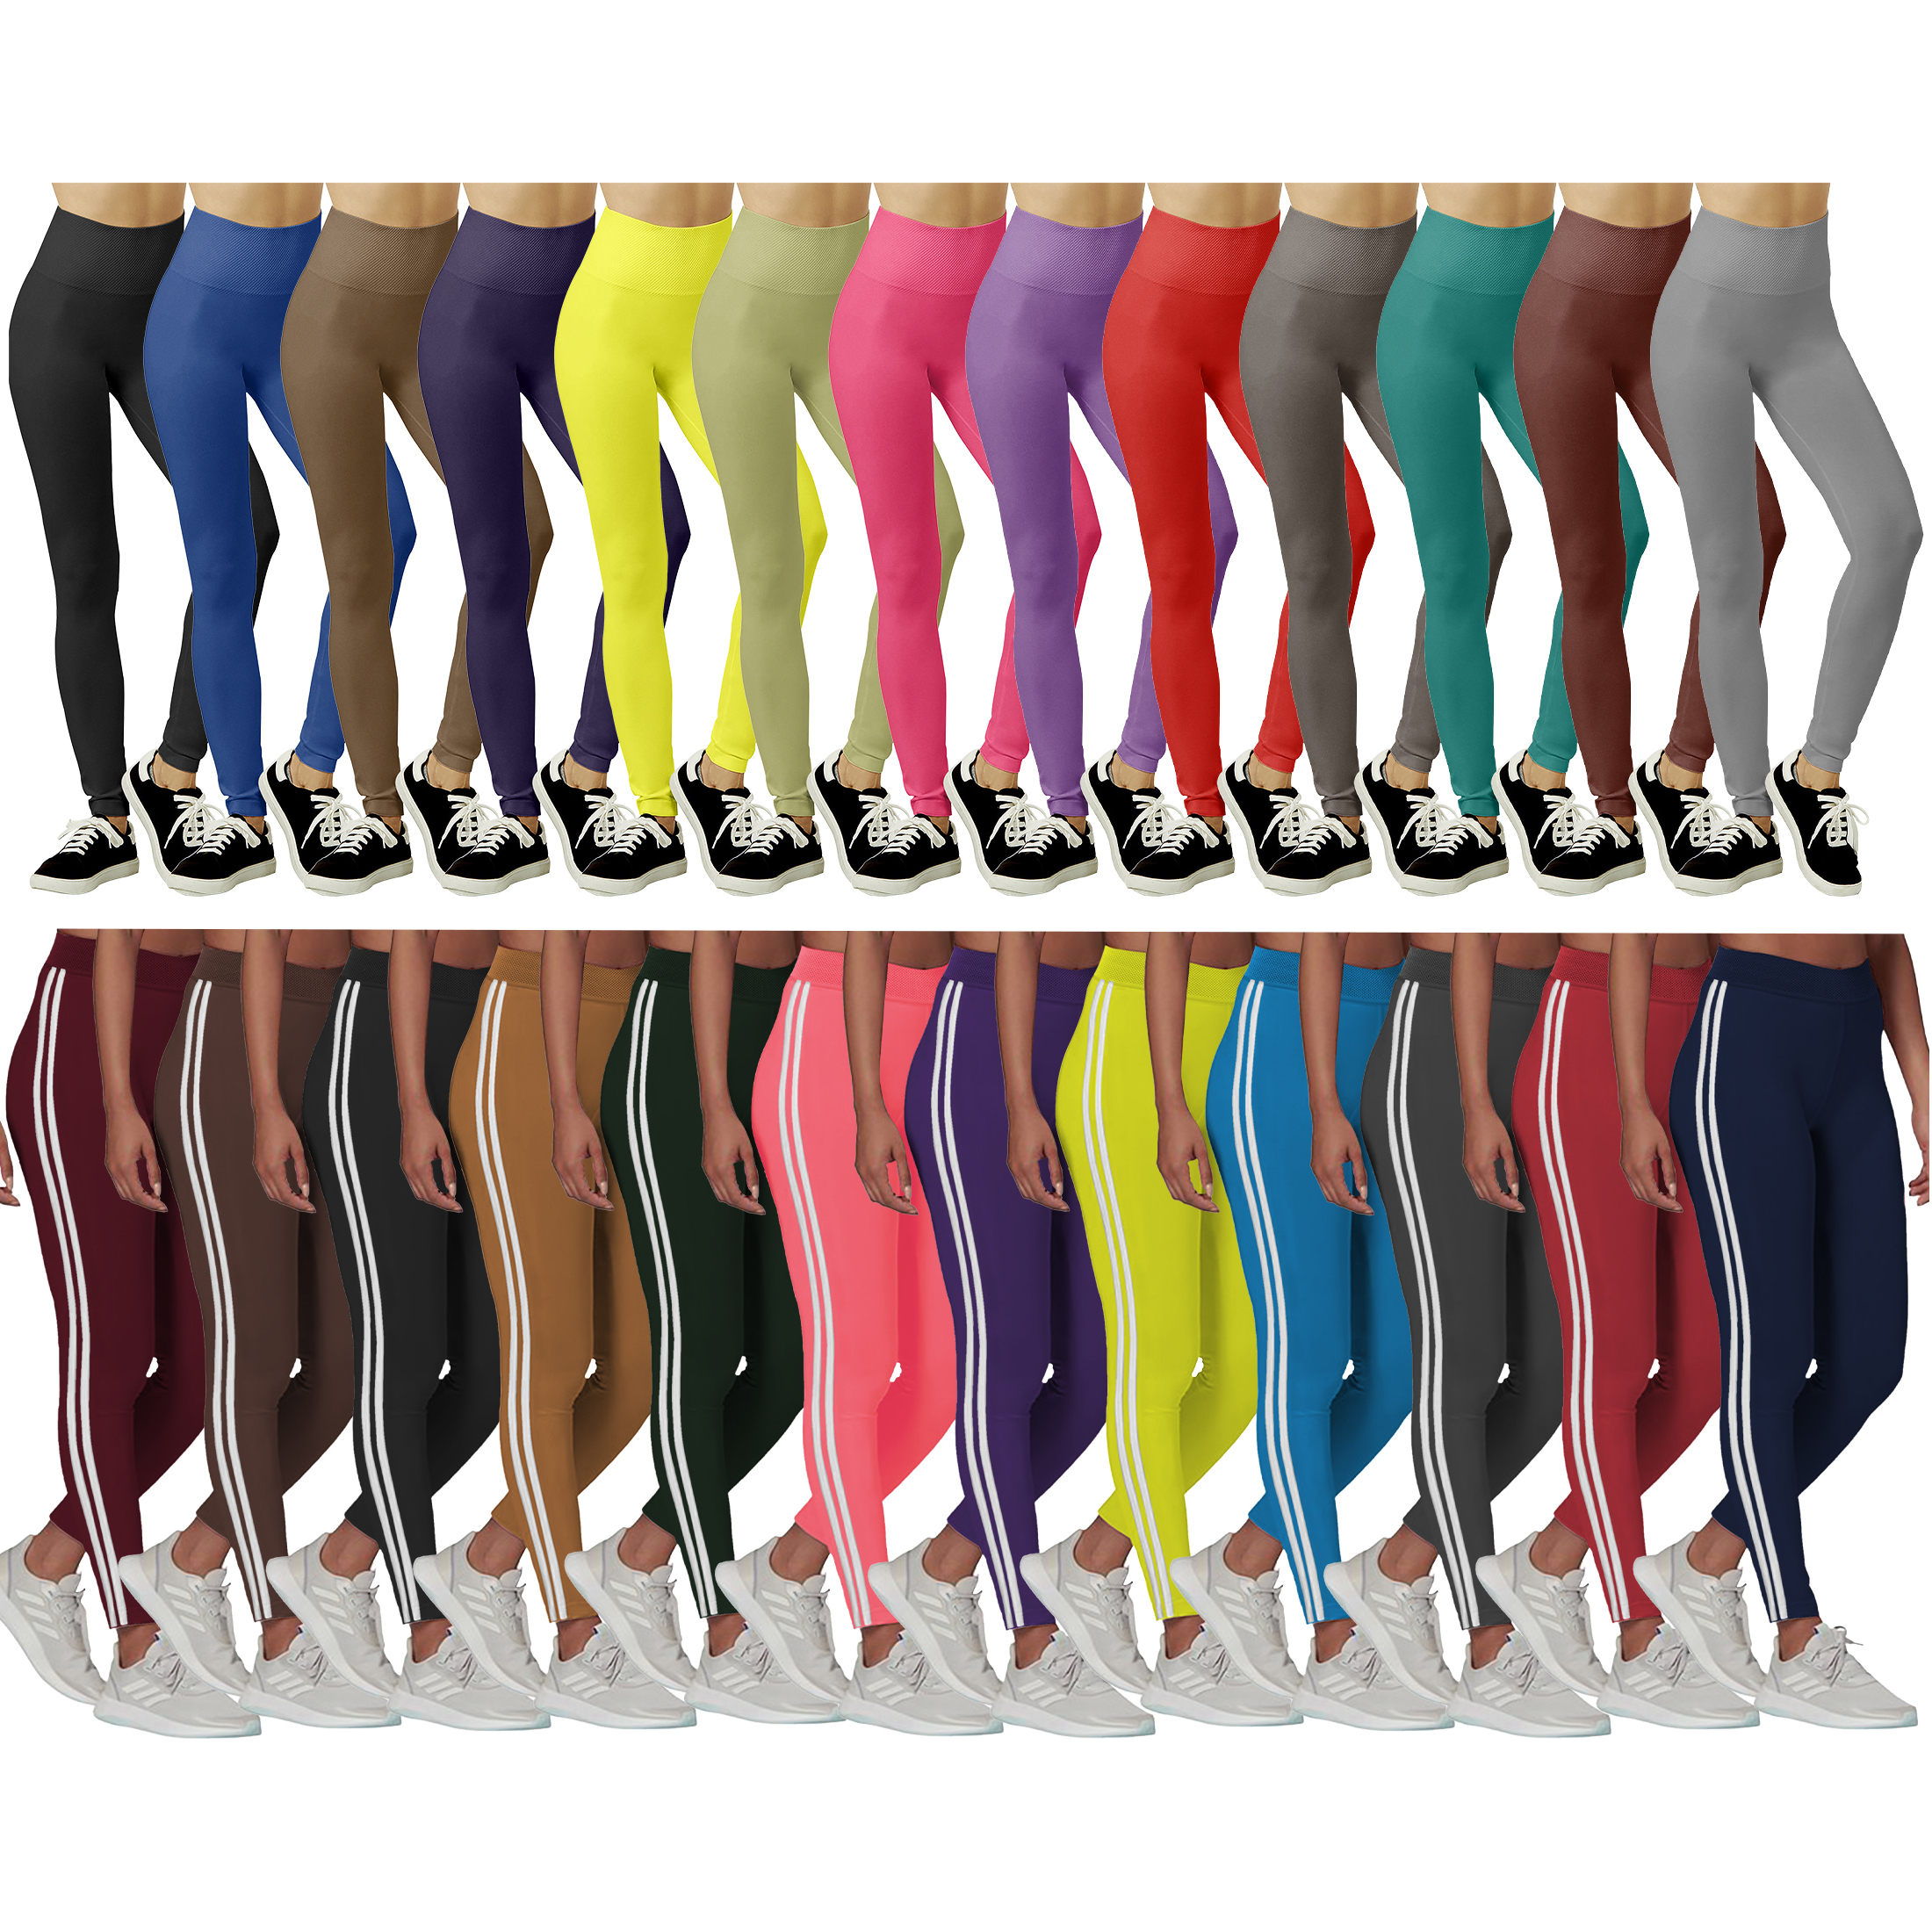 5-Pack Women's Fleece-Lined High Waisted Workout Yoga Leggings - Solid & Stripes, L/XL